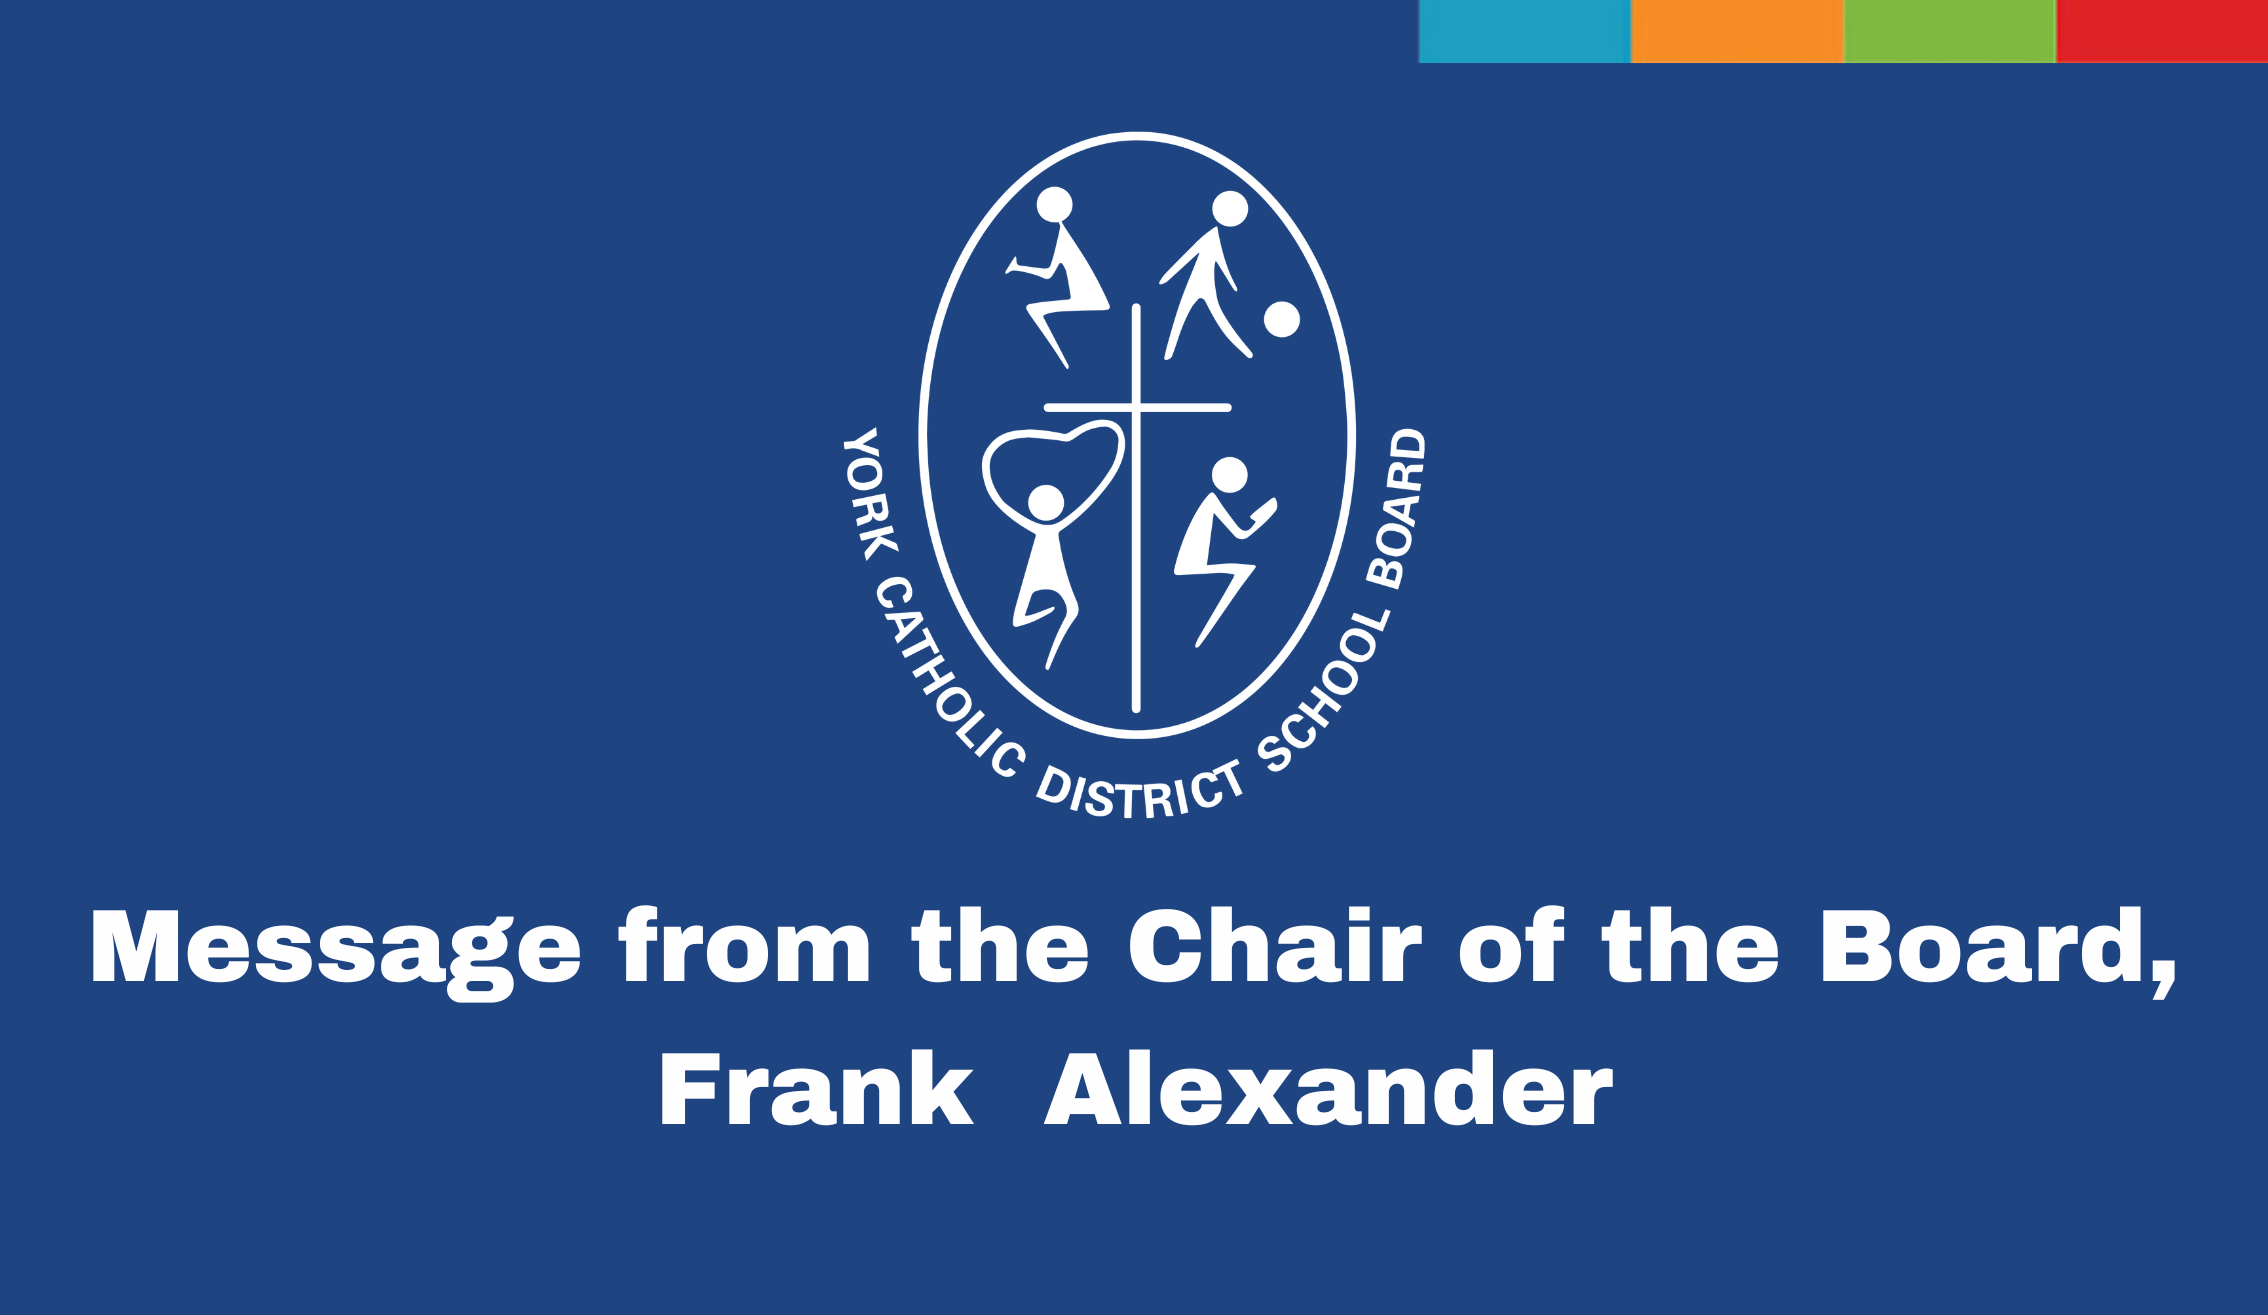 Blue background, white YCDSB logo, message from the chair of the Board Frank Alexander